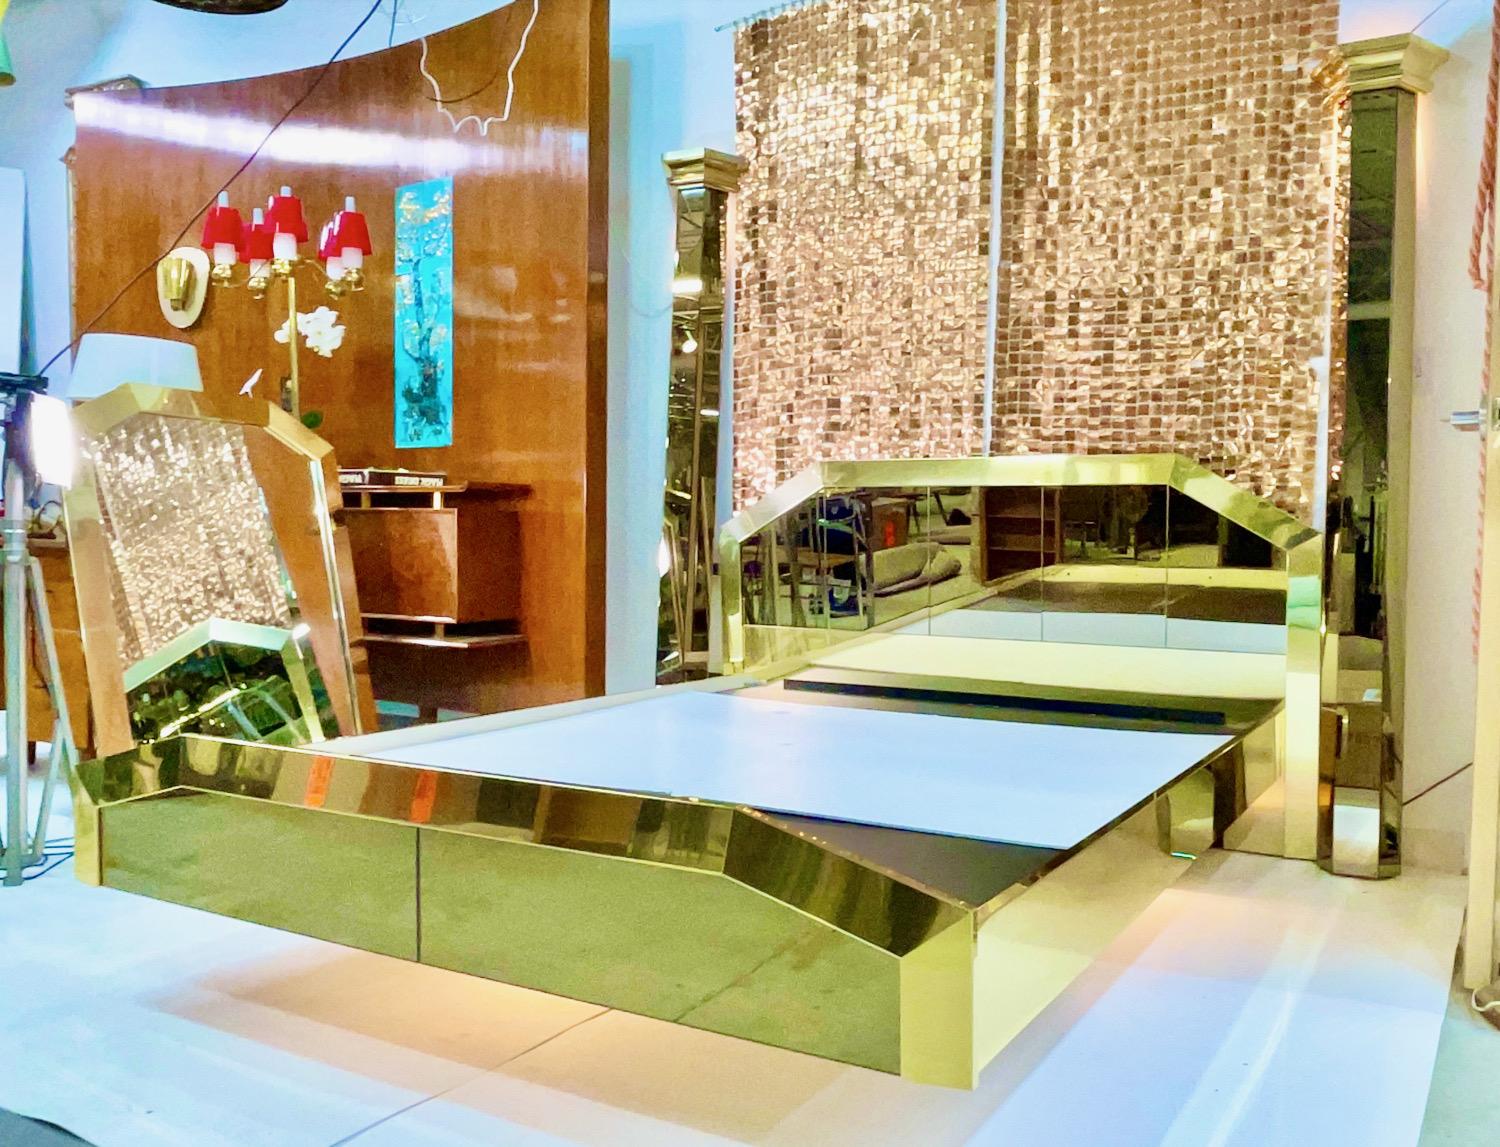 We actually have TWO of these beds available.
Jaw dropping queen size two poster floating platform bed clad in polished brass and bronzed mirrored glass designed by O. B. Solie for Ello Furniture Manufacturing Co. from the 